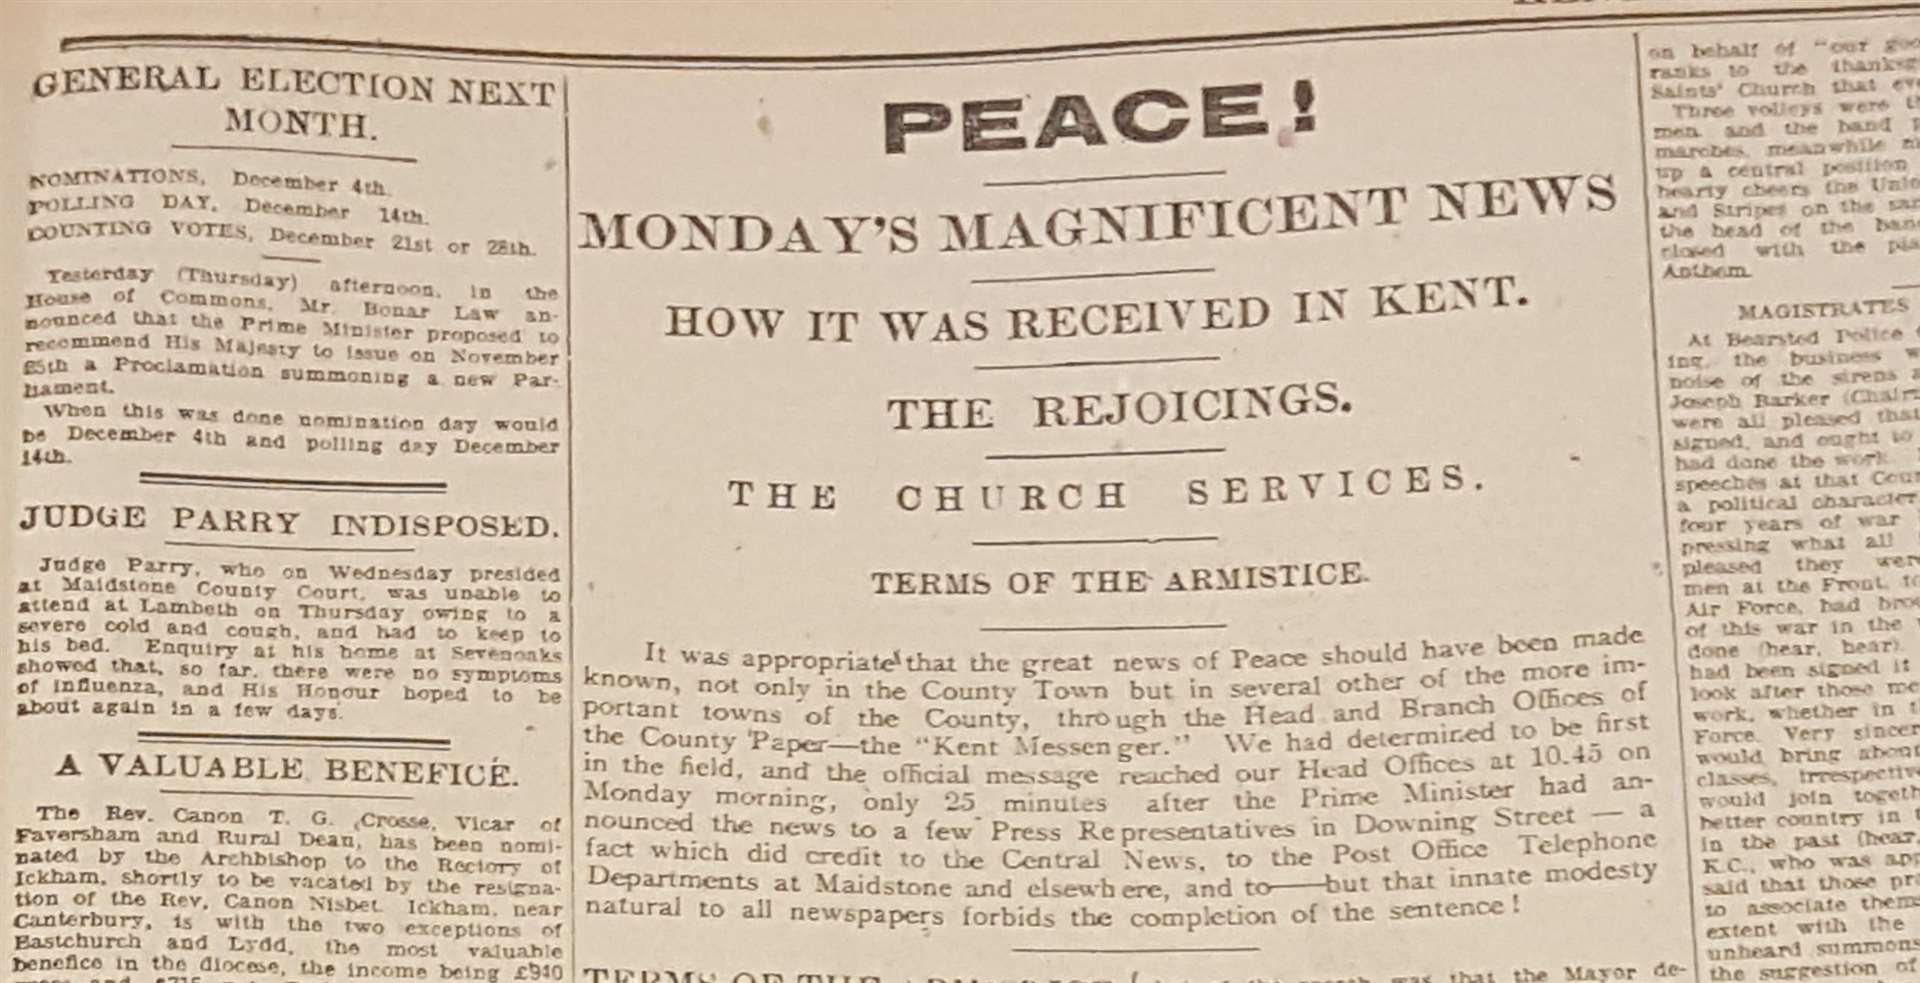 Portrait view of the Kent Messenger's Armistice Day report on page 7